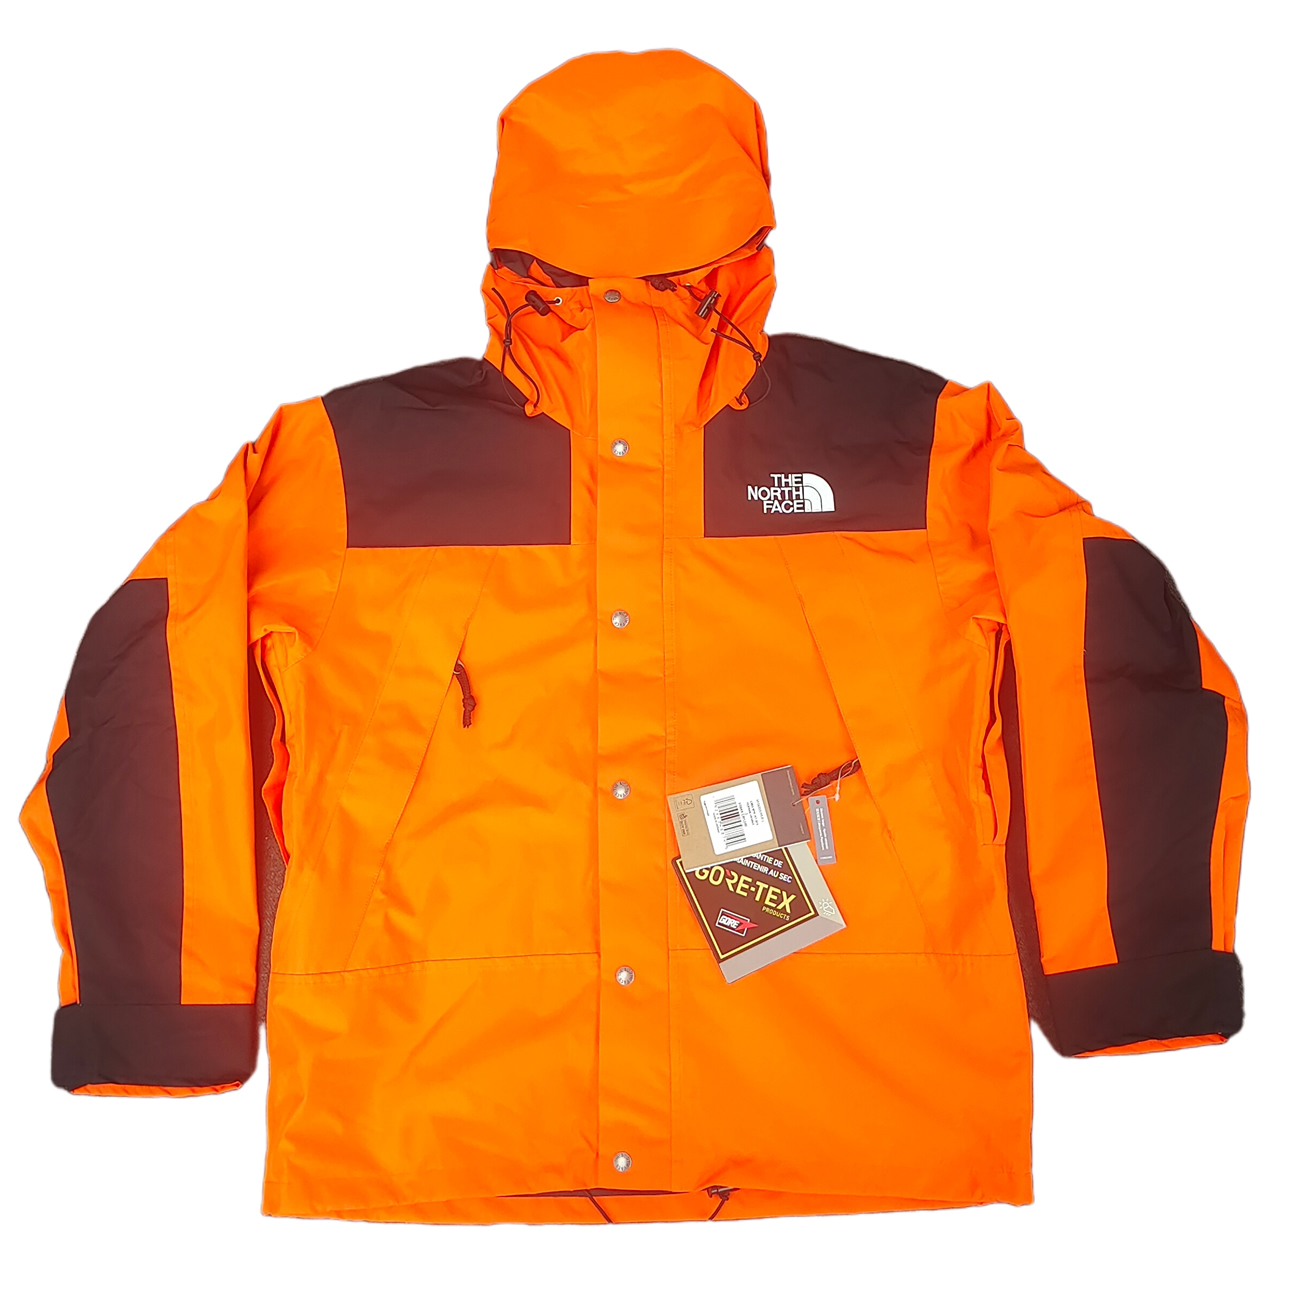 The North Face 1990 Mountain Jacket Gore Tex (3) - newkick.org